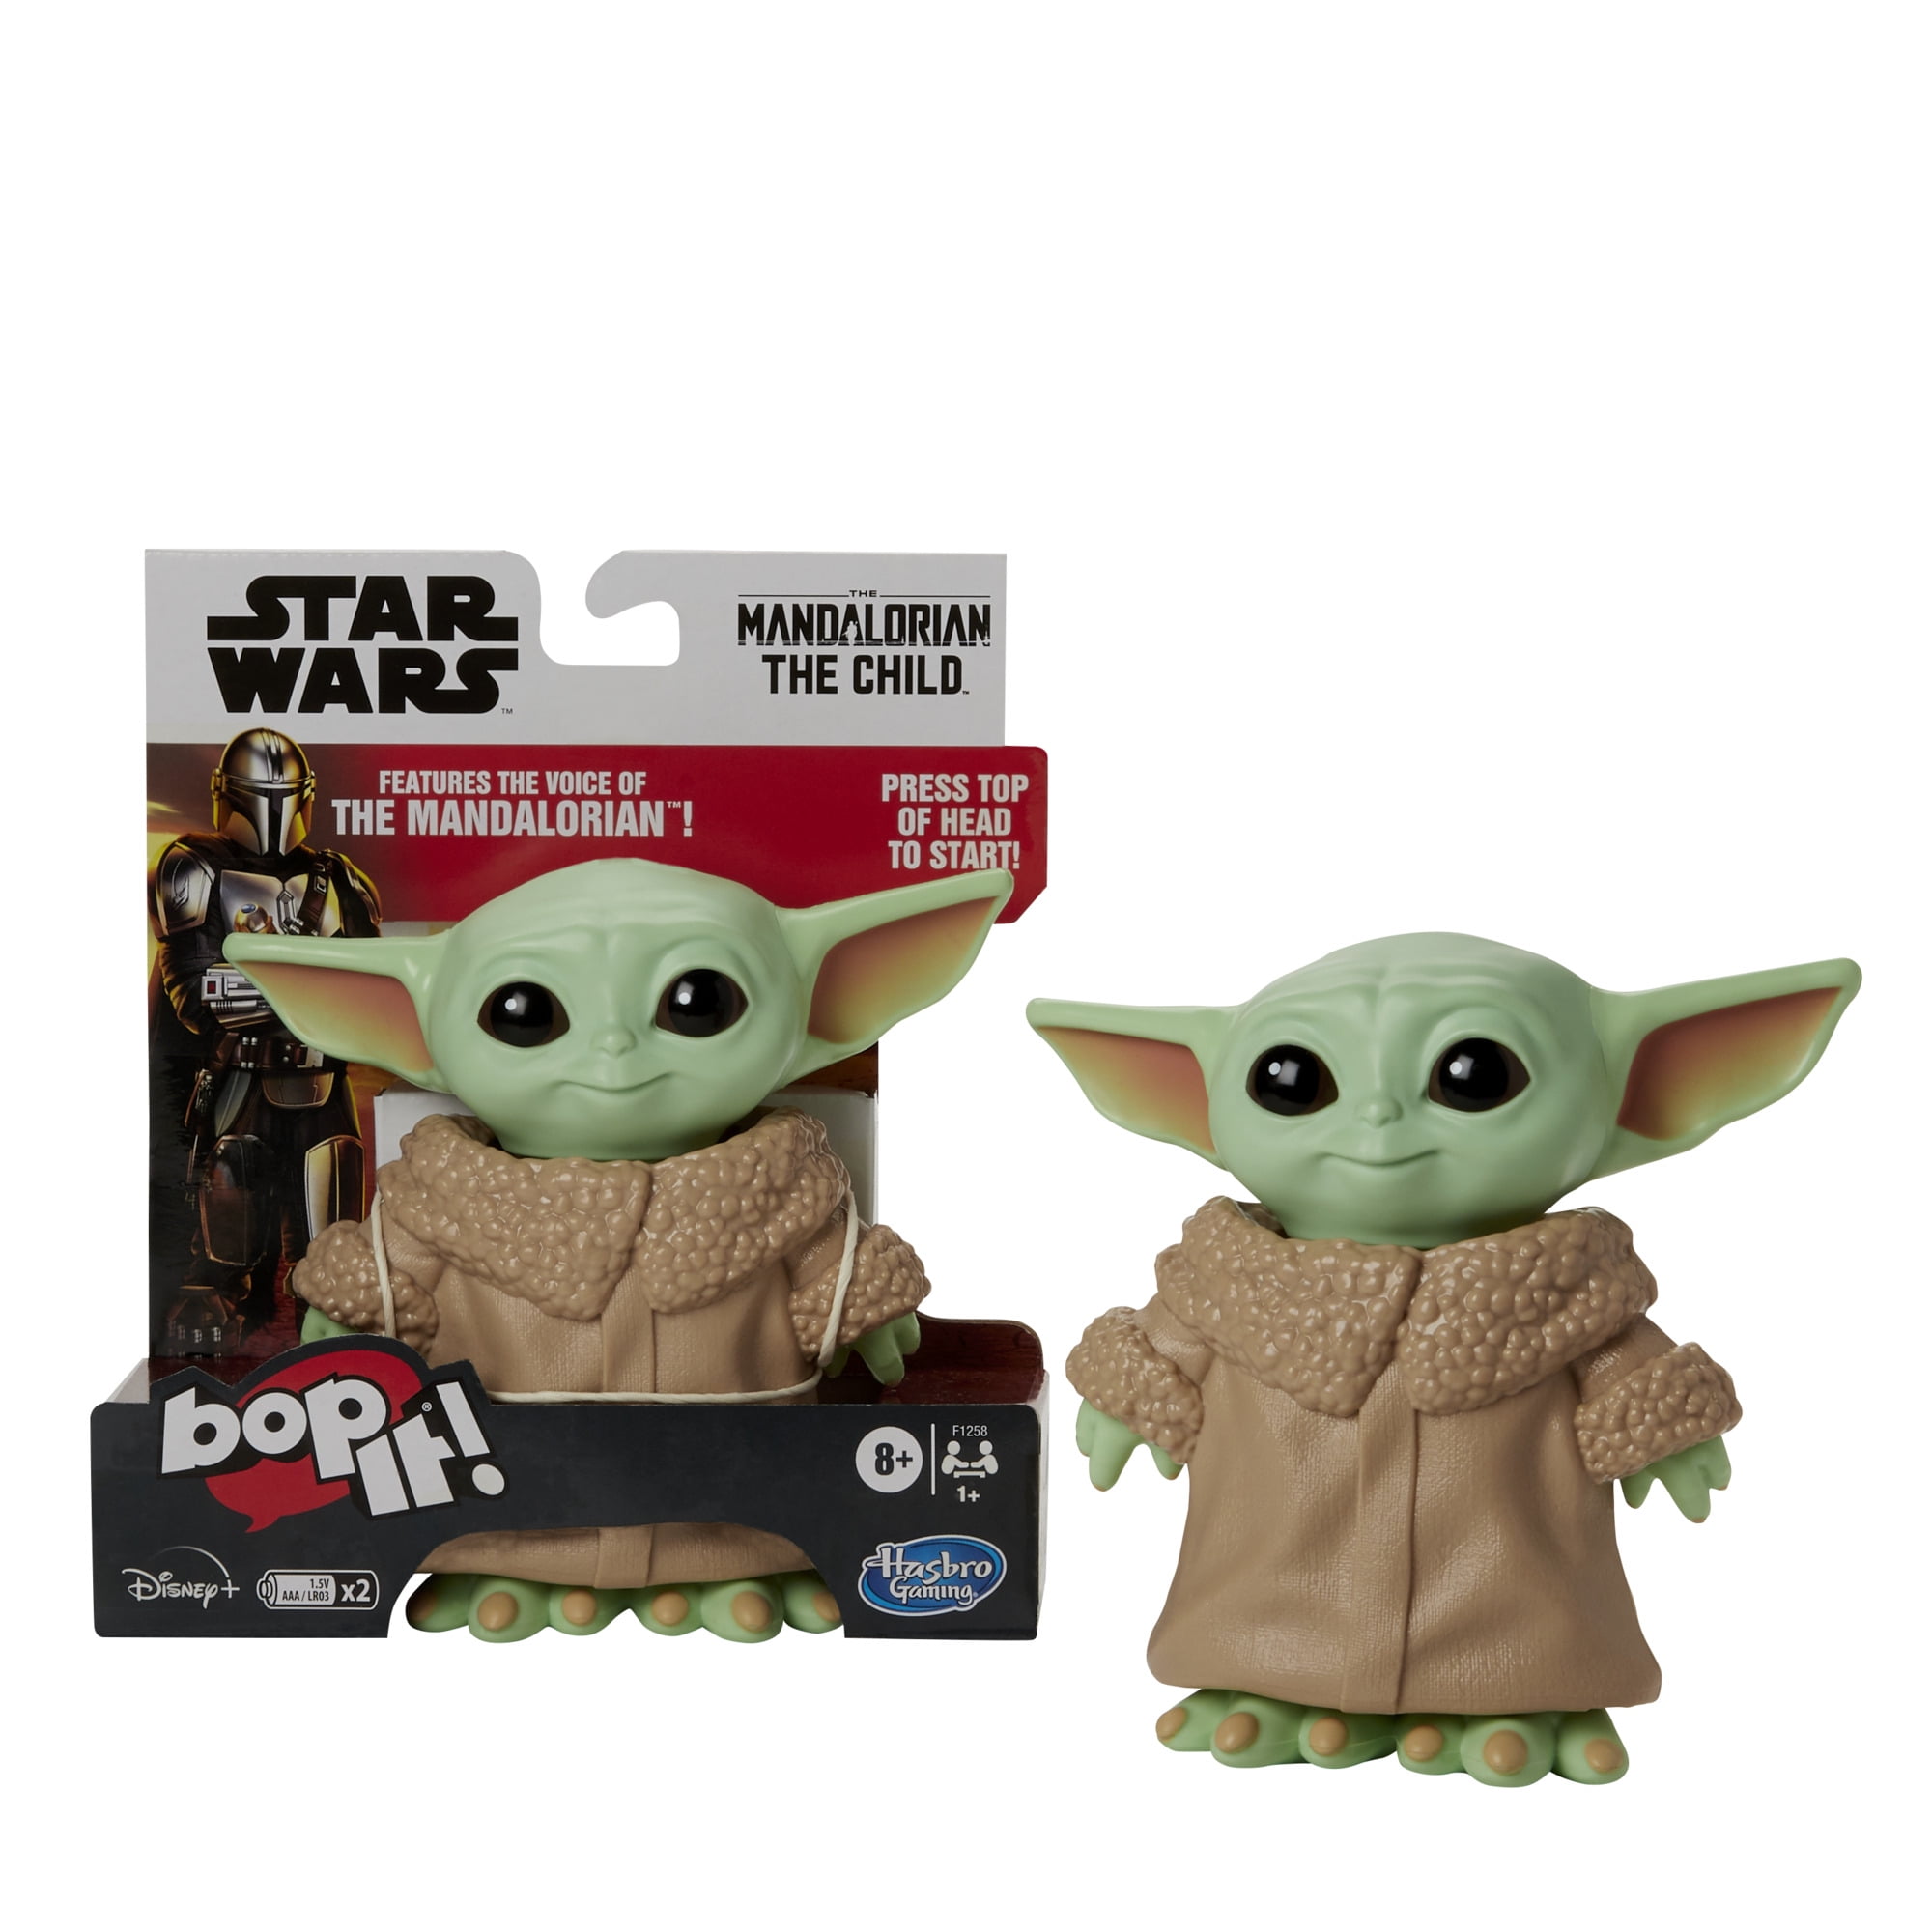 Star Wars The Mandalorian The Child "Baby Yoda" IN STOCK Details about   Funko Pop 